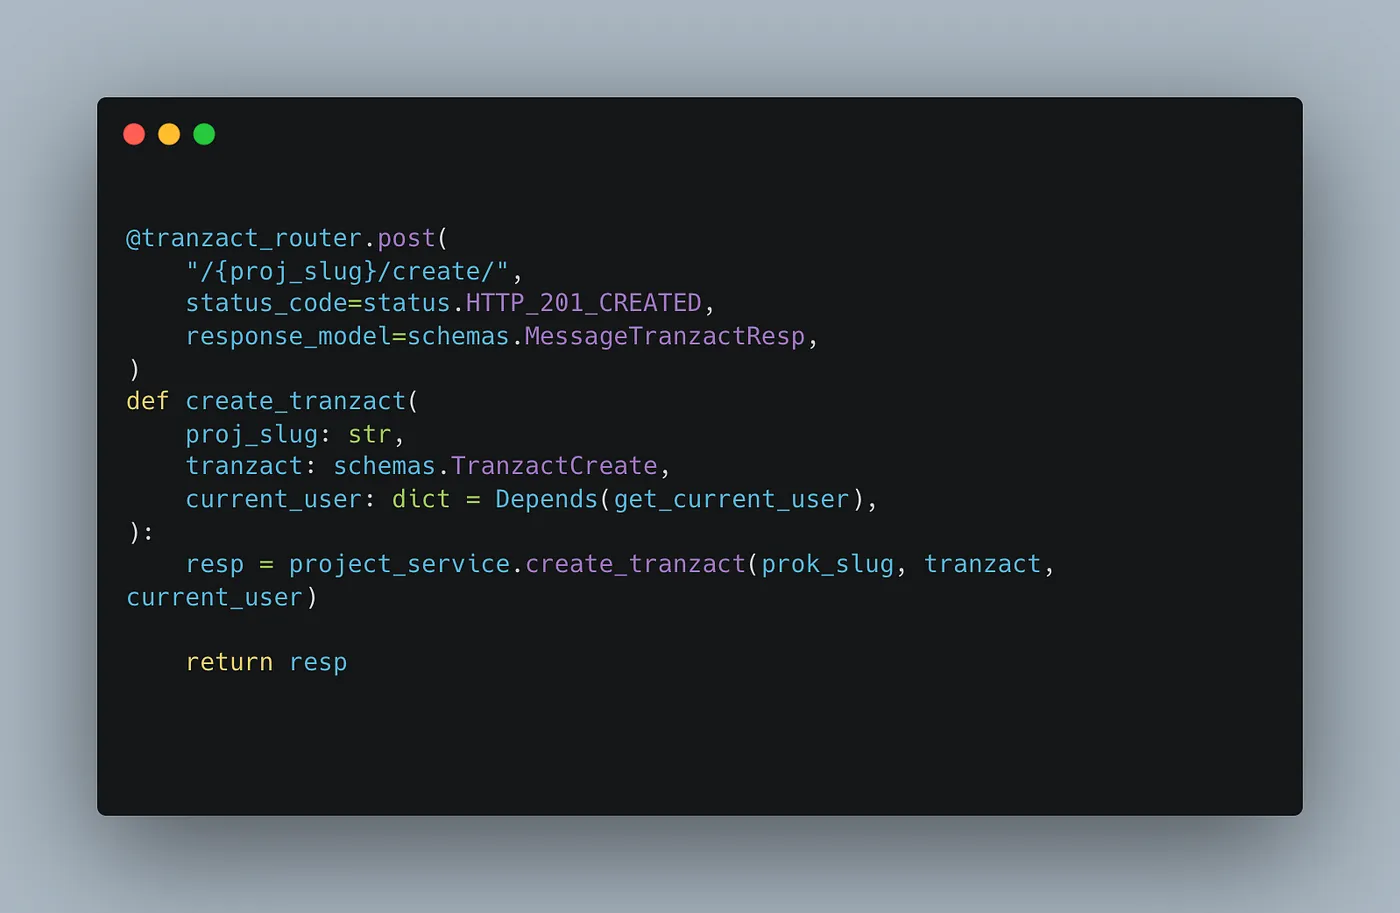 API router where routes for tranzact lives. Ideally lives in your router.py file.